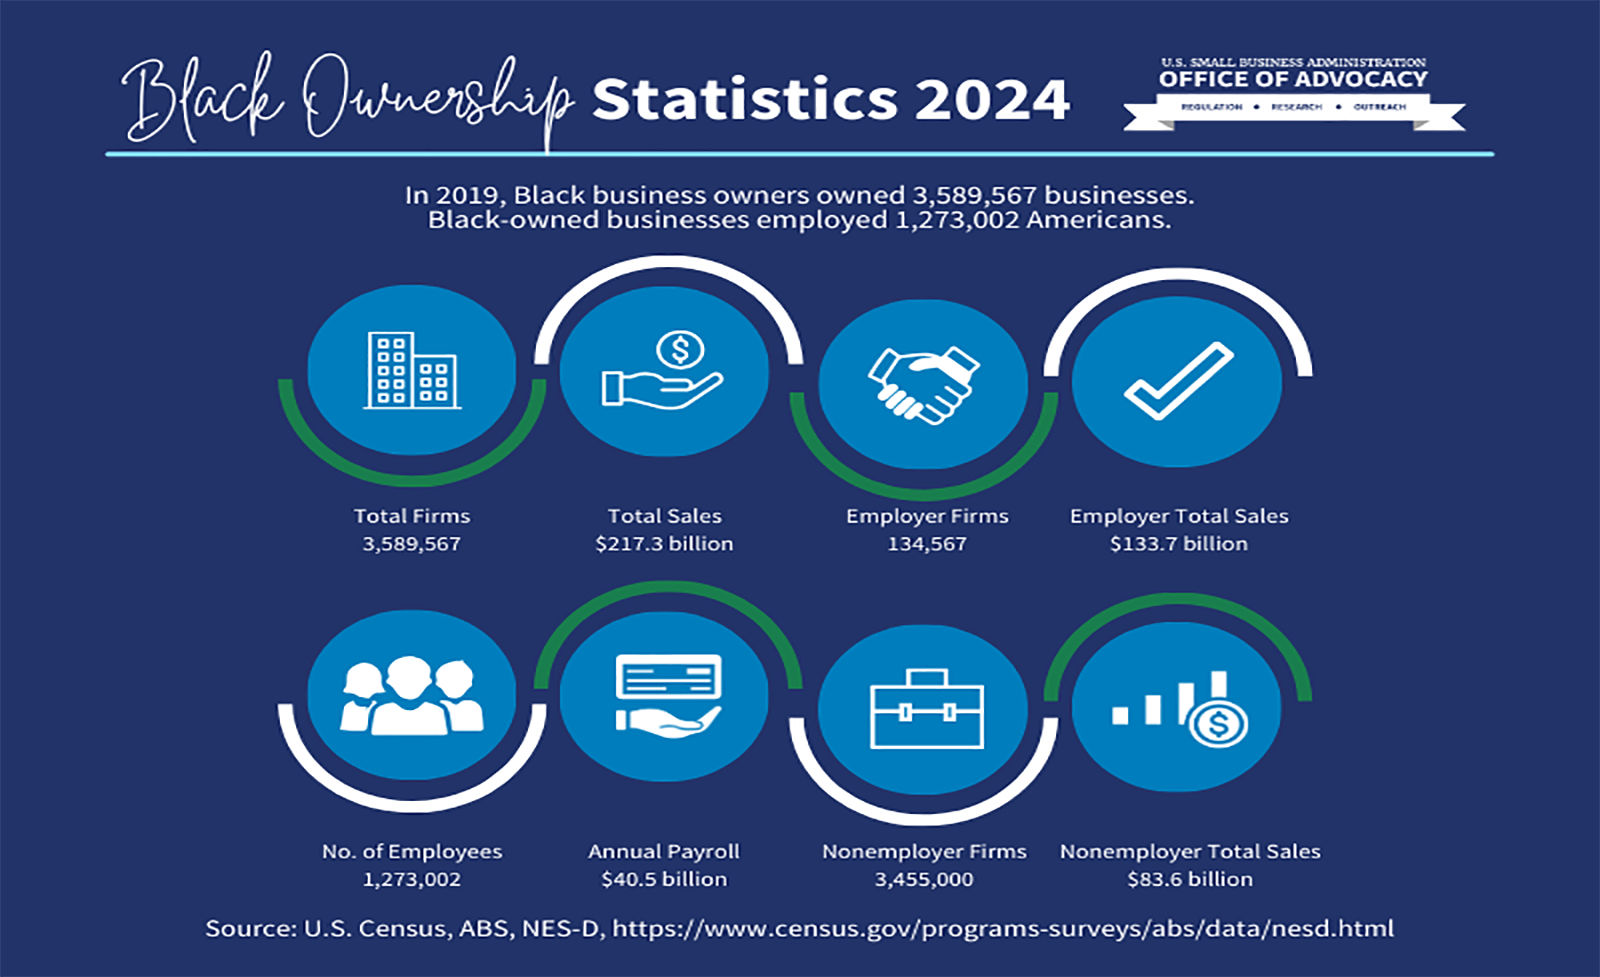 Black Ownership Statistics 2024 In 2019, Black business owners owned 3,589,567 businesses. Black-owned businesses employed 1,273,002 Americans. Total Firms 3,589,567 Total Sales $217.3 billion Employer Firms 134,567 Employer Total Sales $133.7 billion No. of Employees 1,273,002 Annual Payroll $40.5 billion Nonemployer Firms 3,455,000 Nonemployer Total Sales $83.6 billion Source: U.S. Census, ABS, NES-D, https://www.census.gov/programs-surveys/abs/data/nesd.html